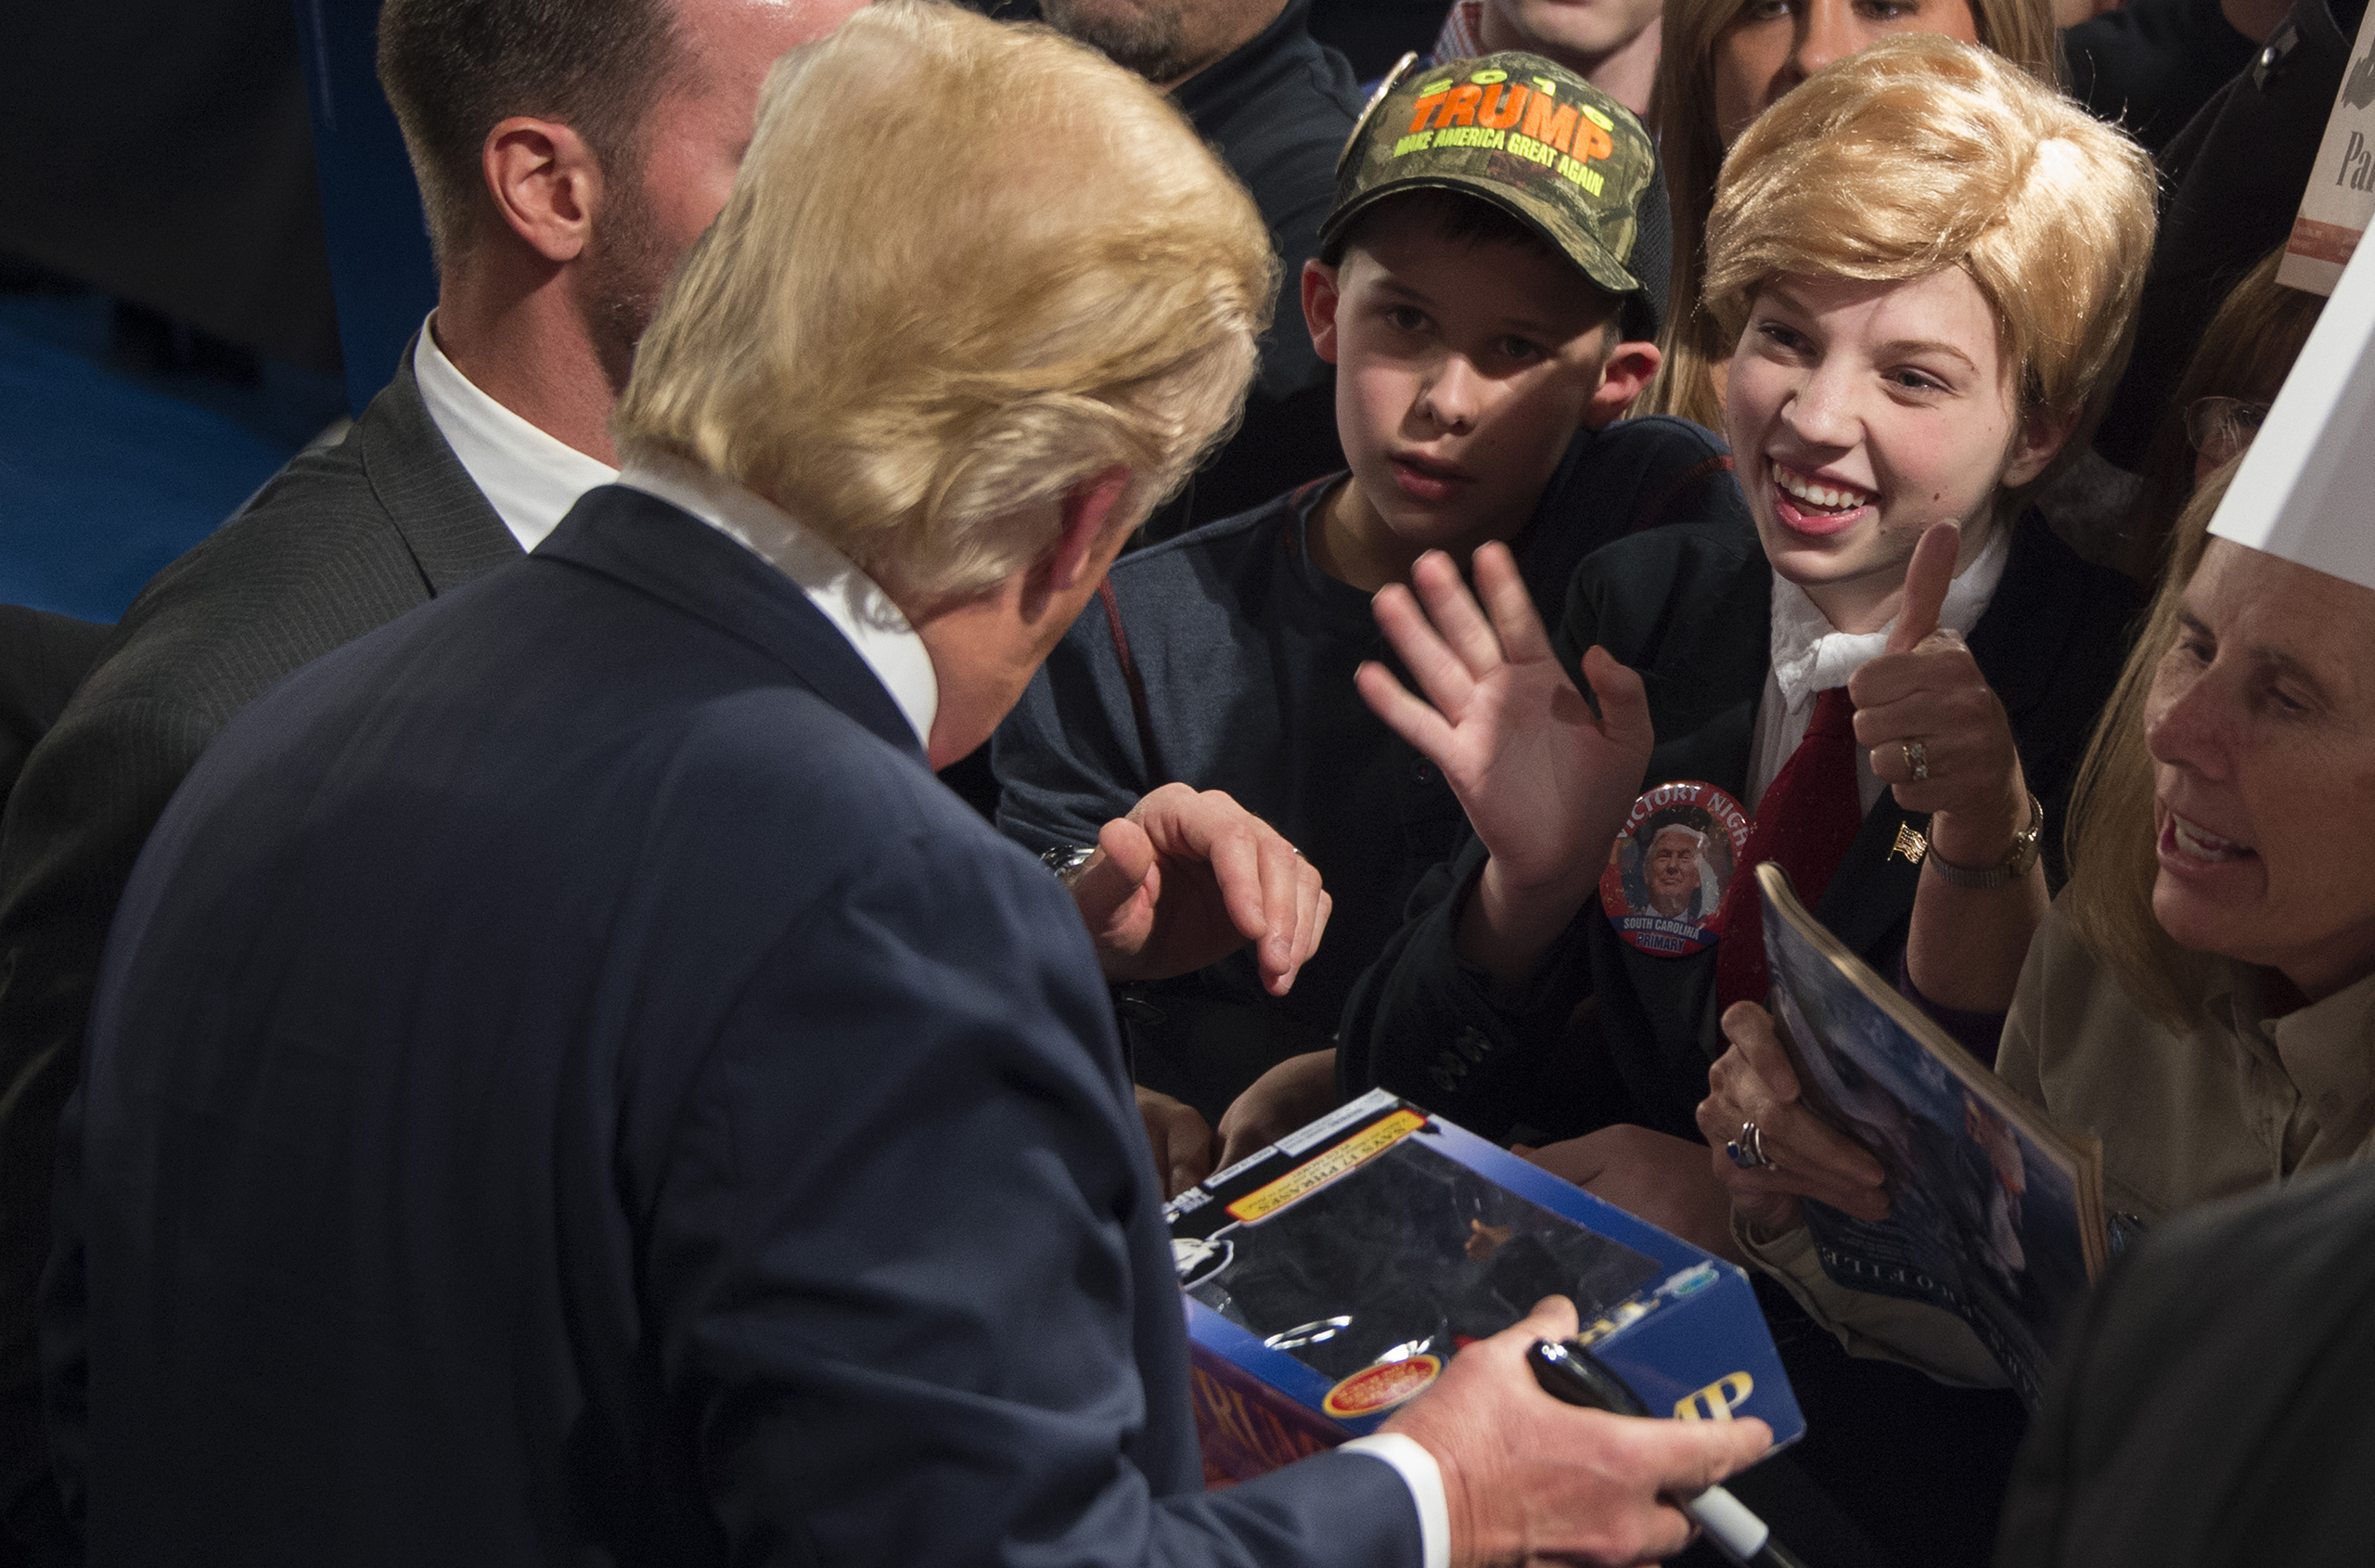 Donald Trump signs a Trump doll for a girl dressed in costume like him during a campaign rally in Sumter, S.C., on Feb. 17, 2016.